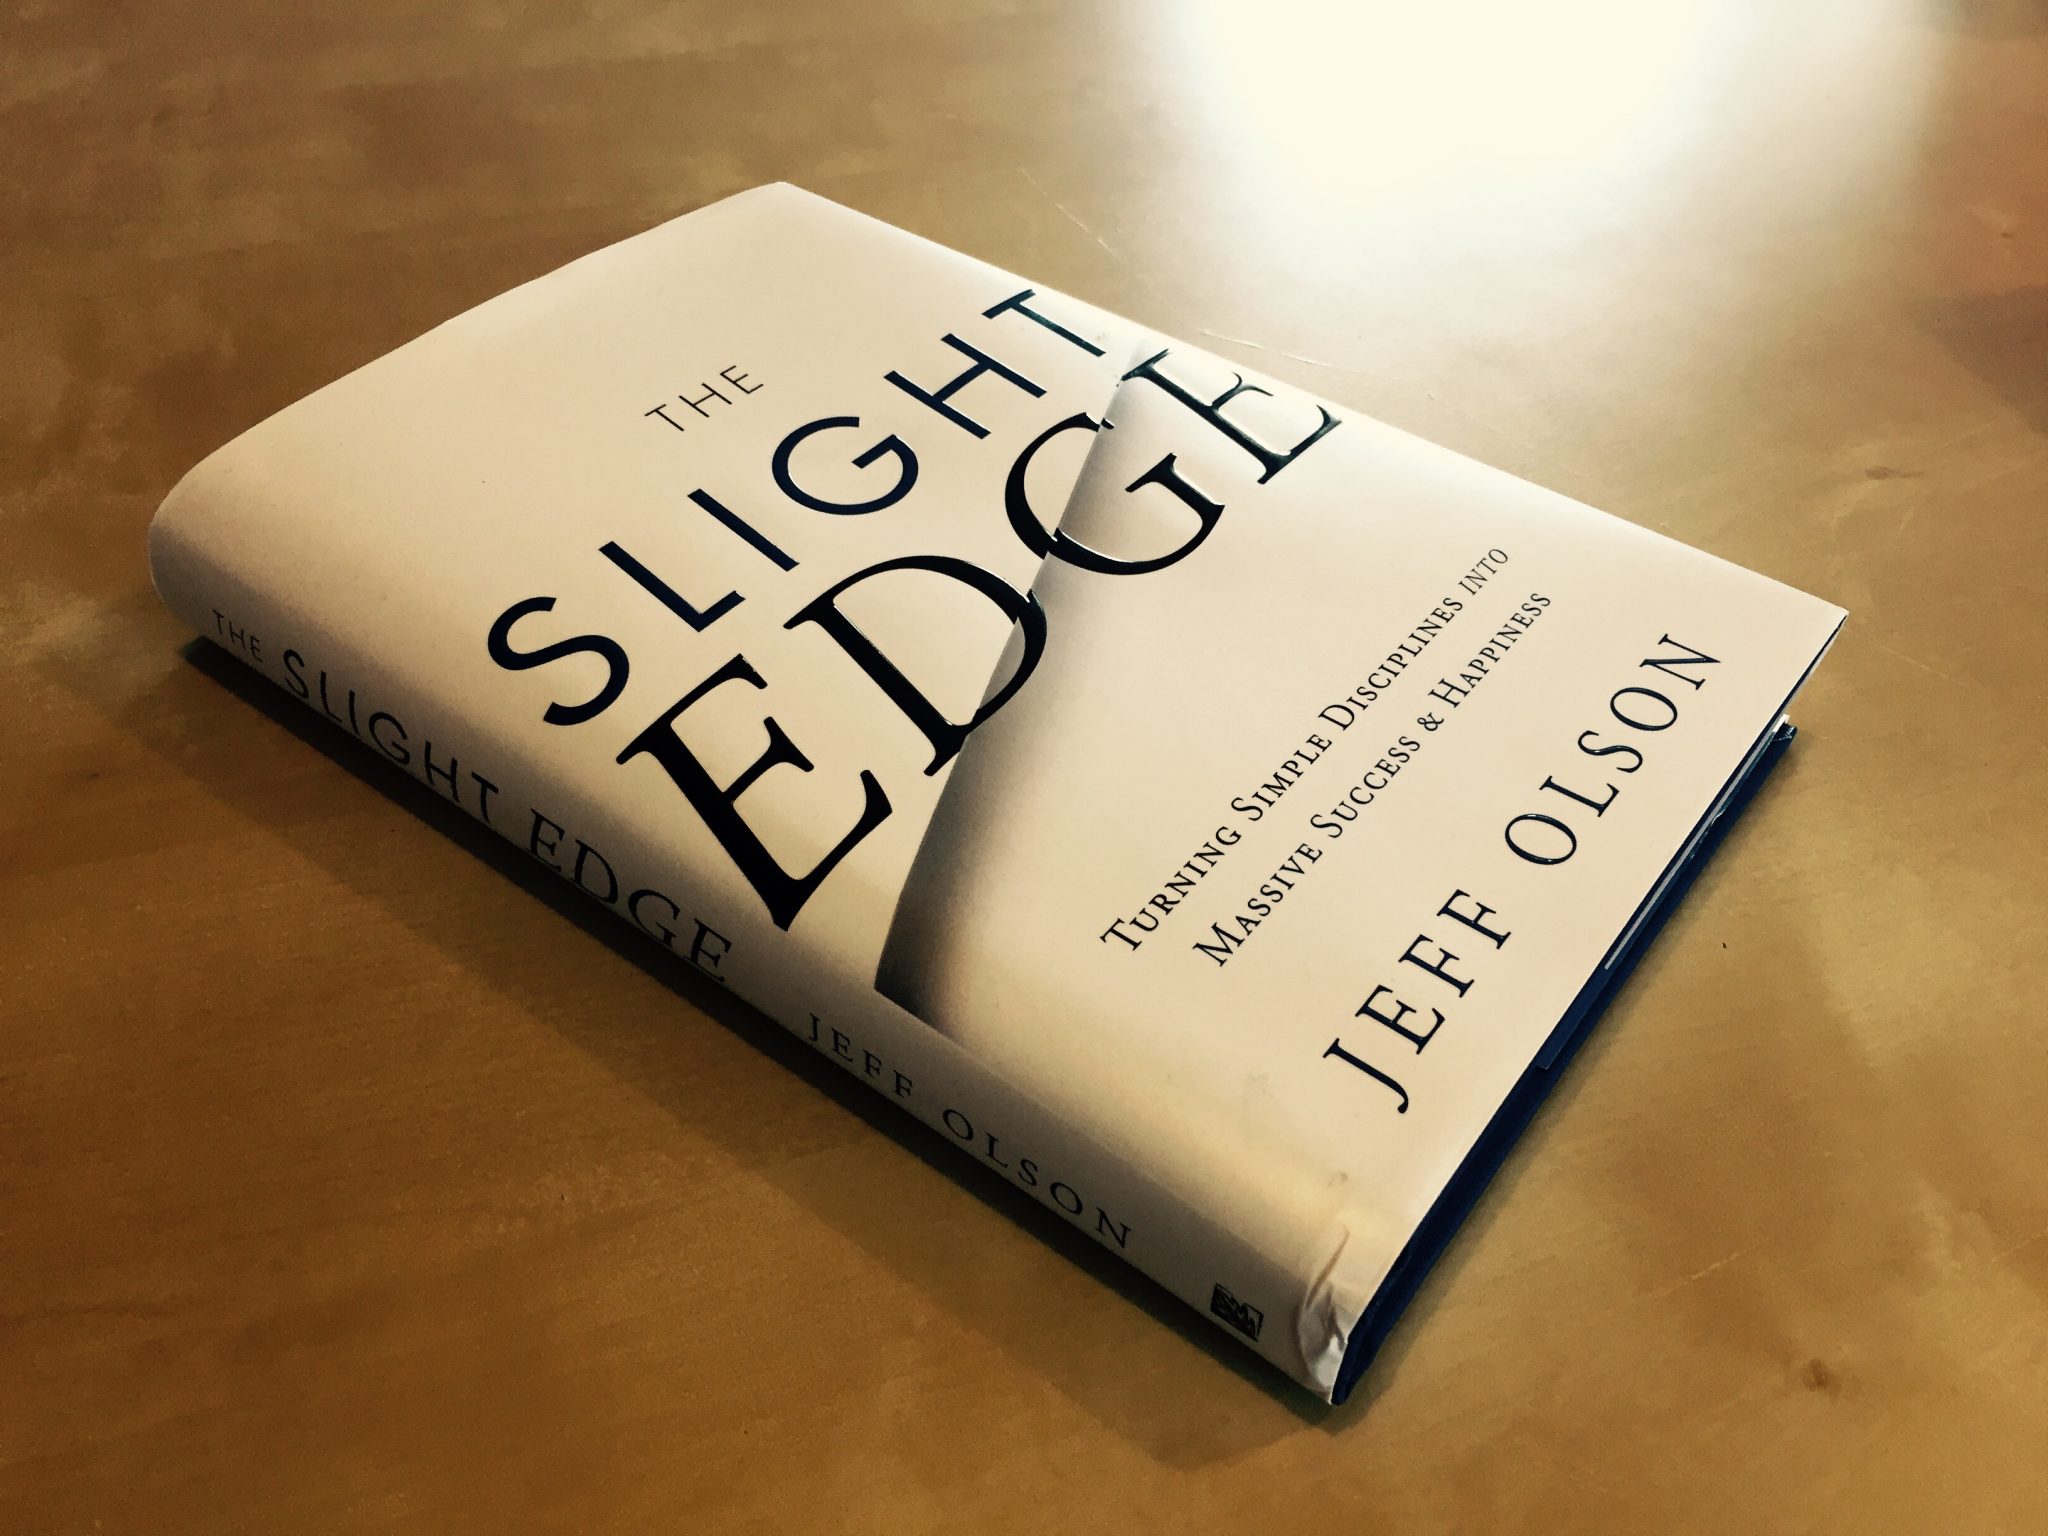 Review: The Slight Edge, by Jeff Olson – Scott Gould